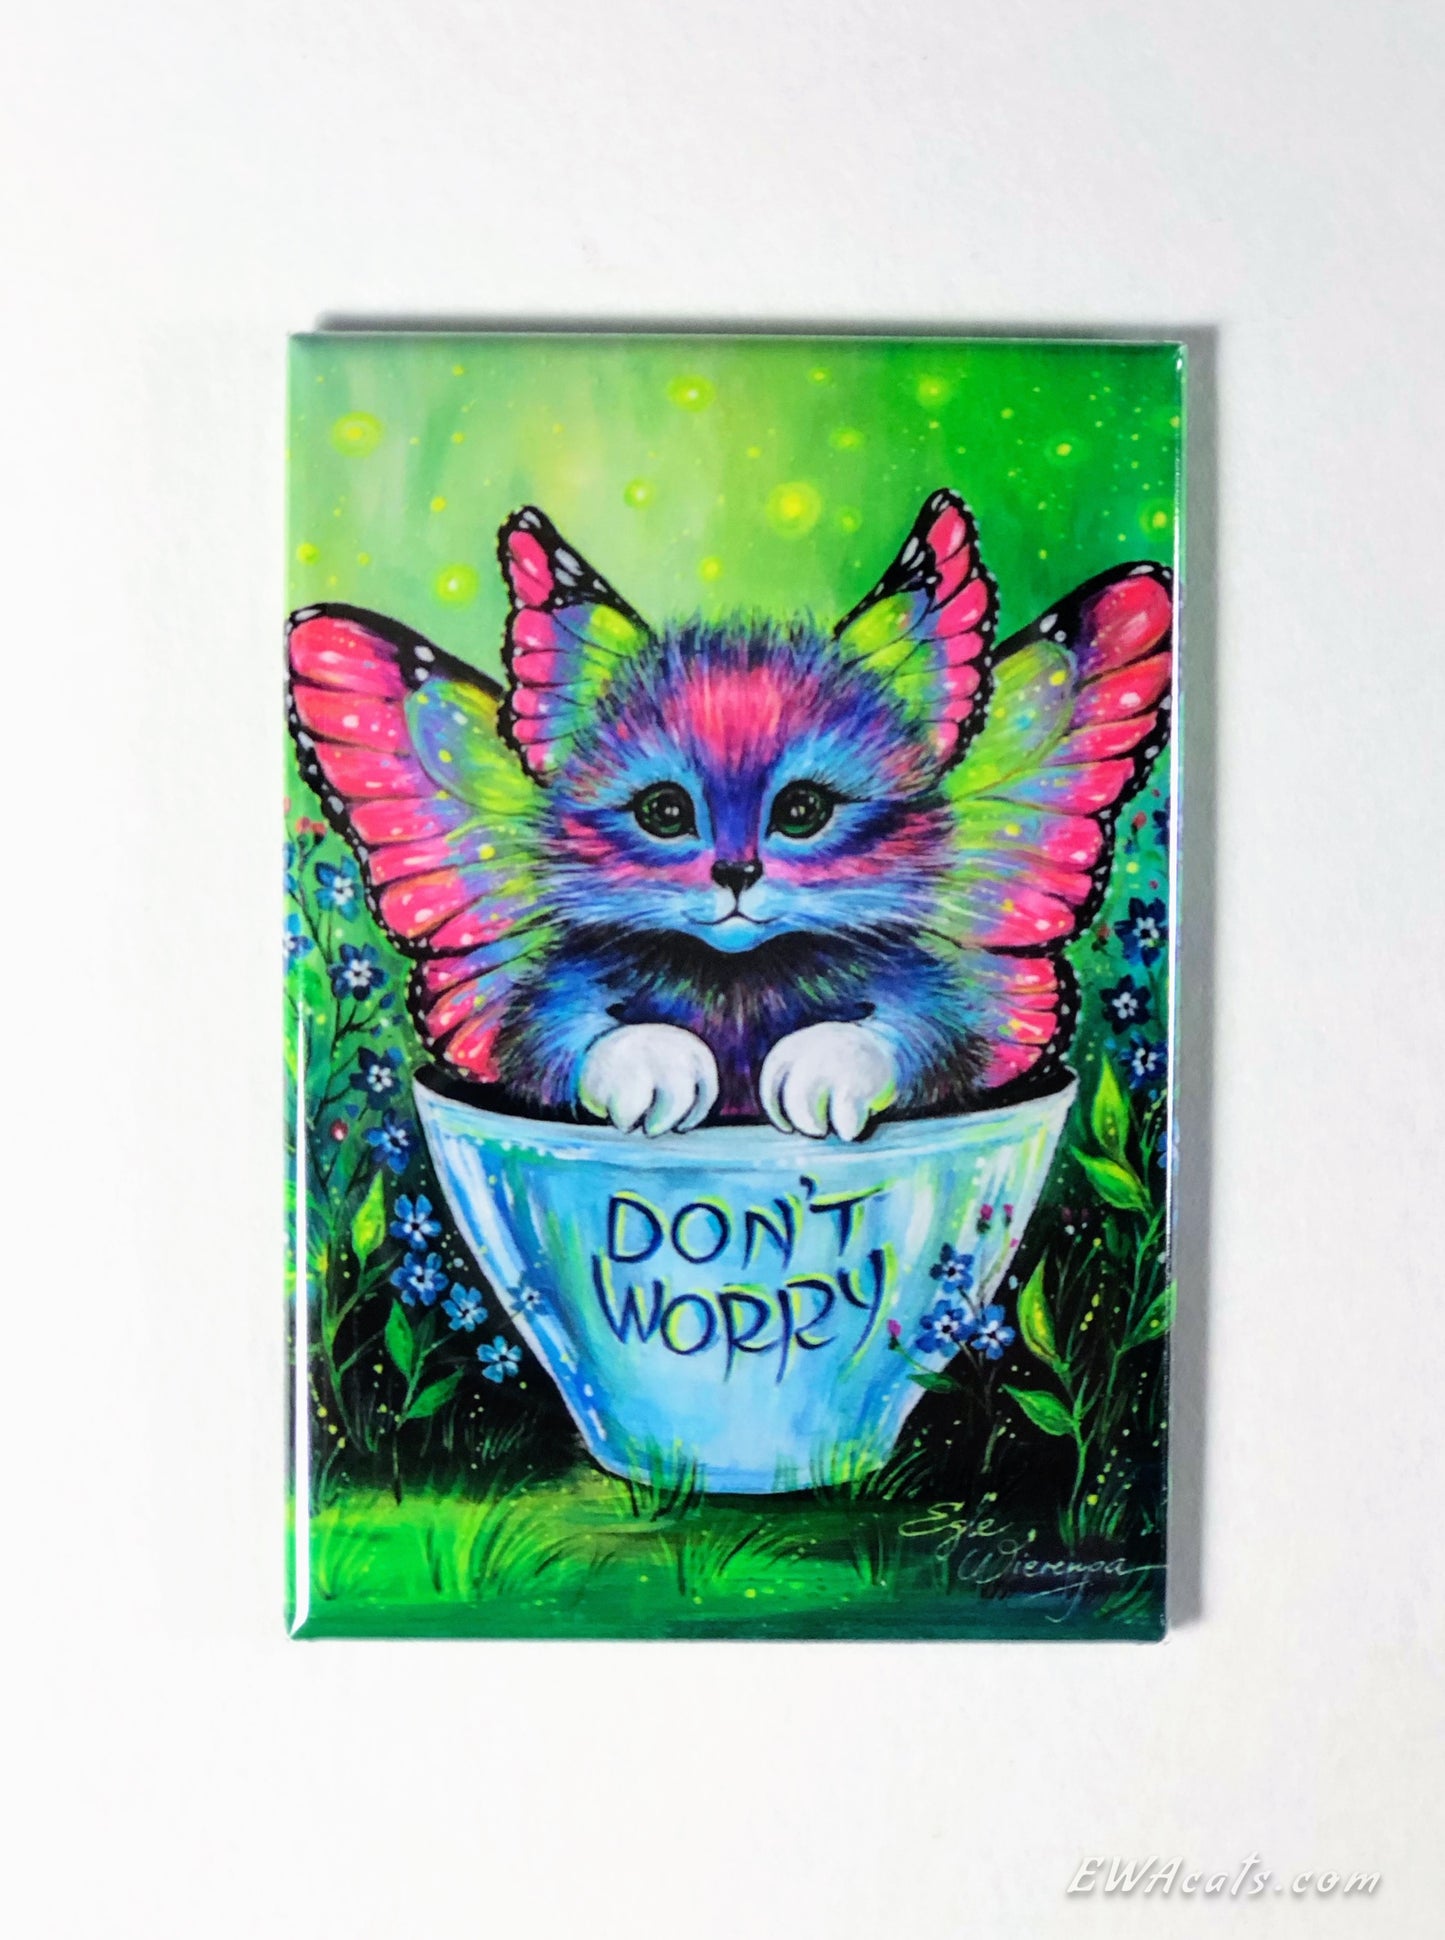 MAGNET 2"x 3" Rectangle "Don't Worry"